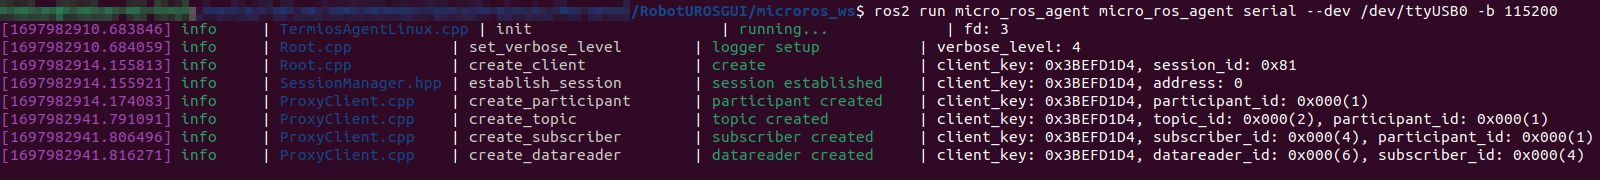 Micro ROS Agent Subscriber Added Terminal Output v4